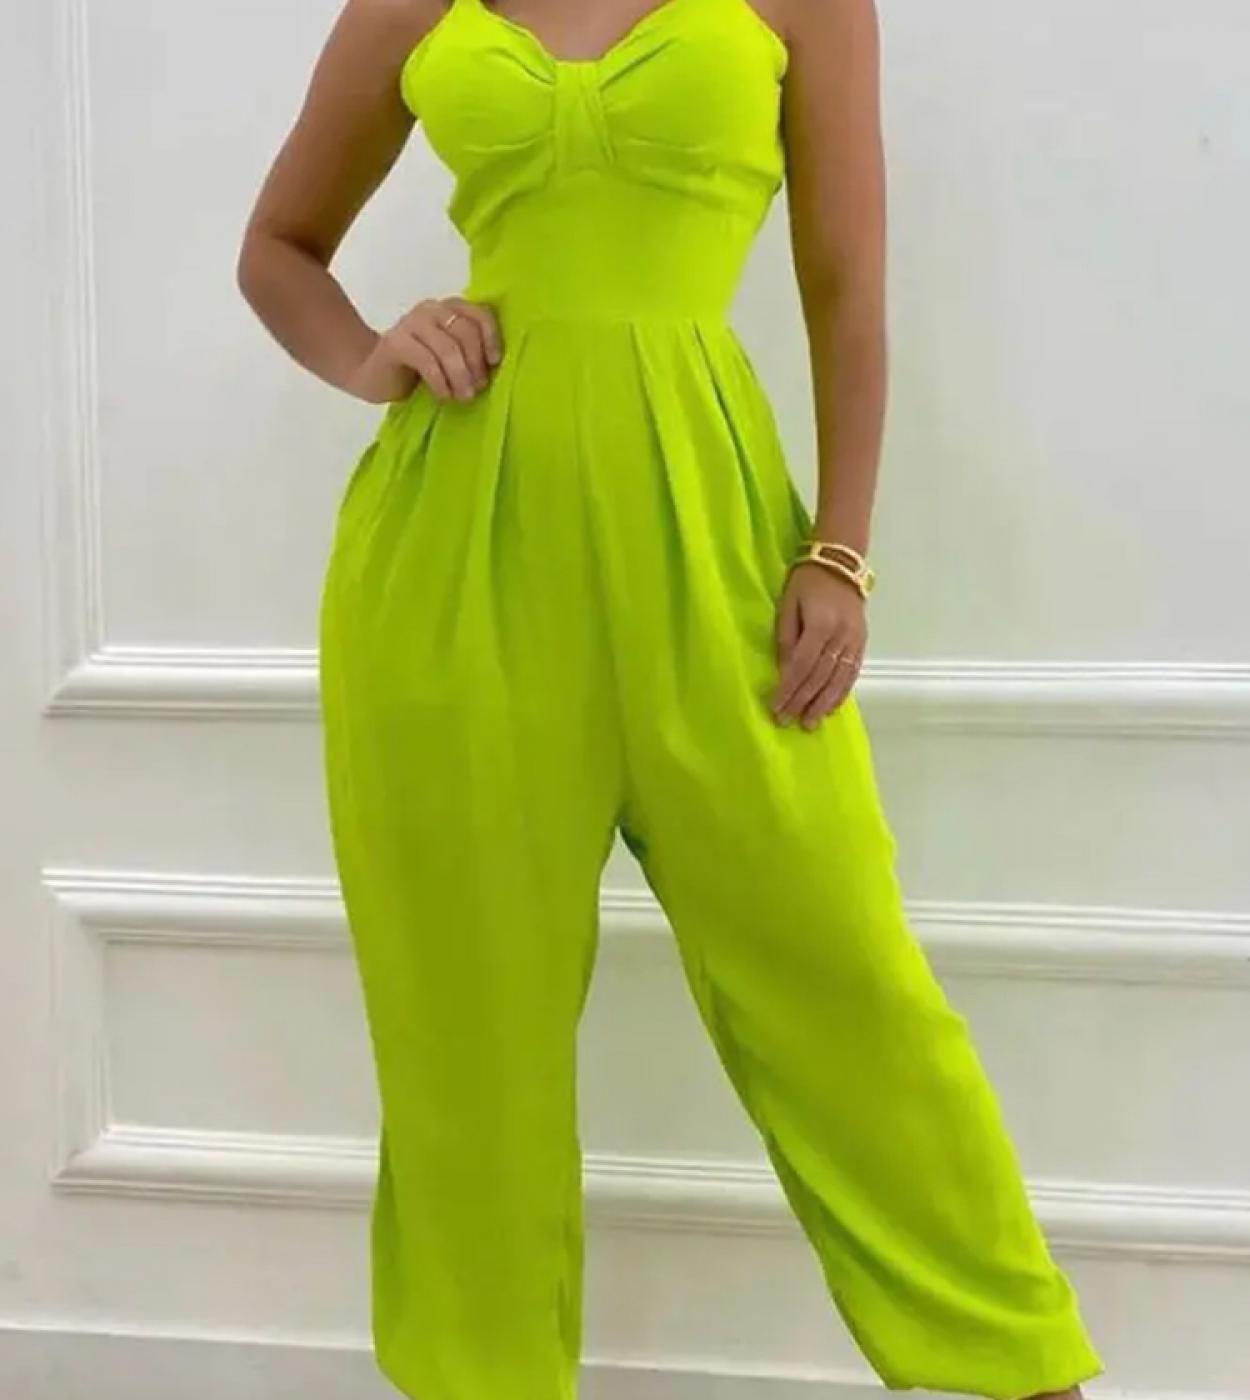 Ruched Cutout Knotted Cuffed Jumpsuit Elegant Overalls Femme